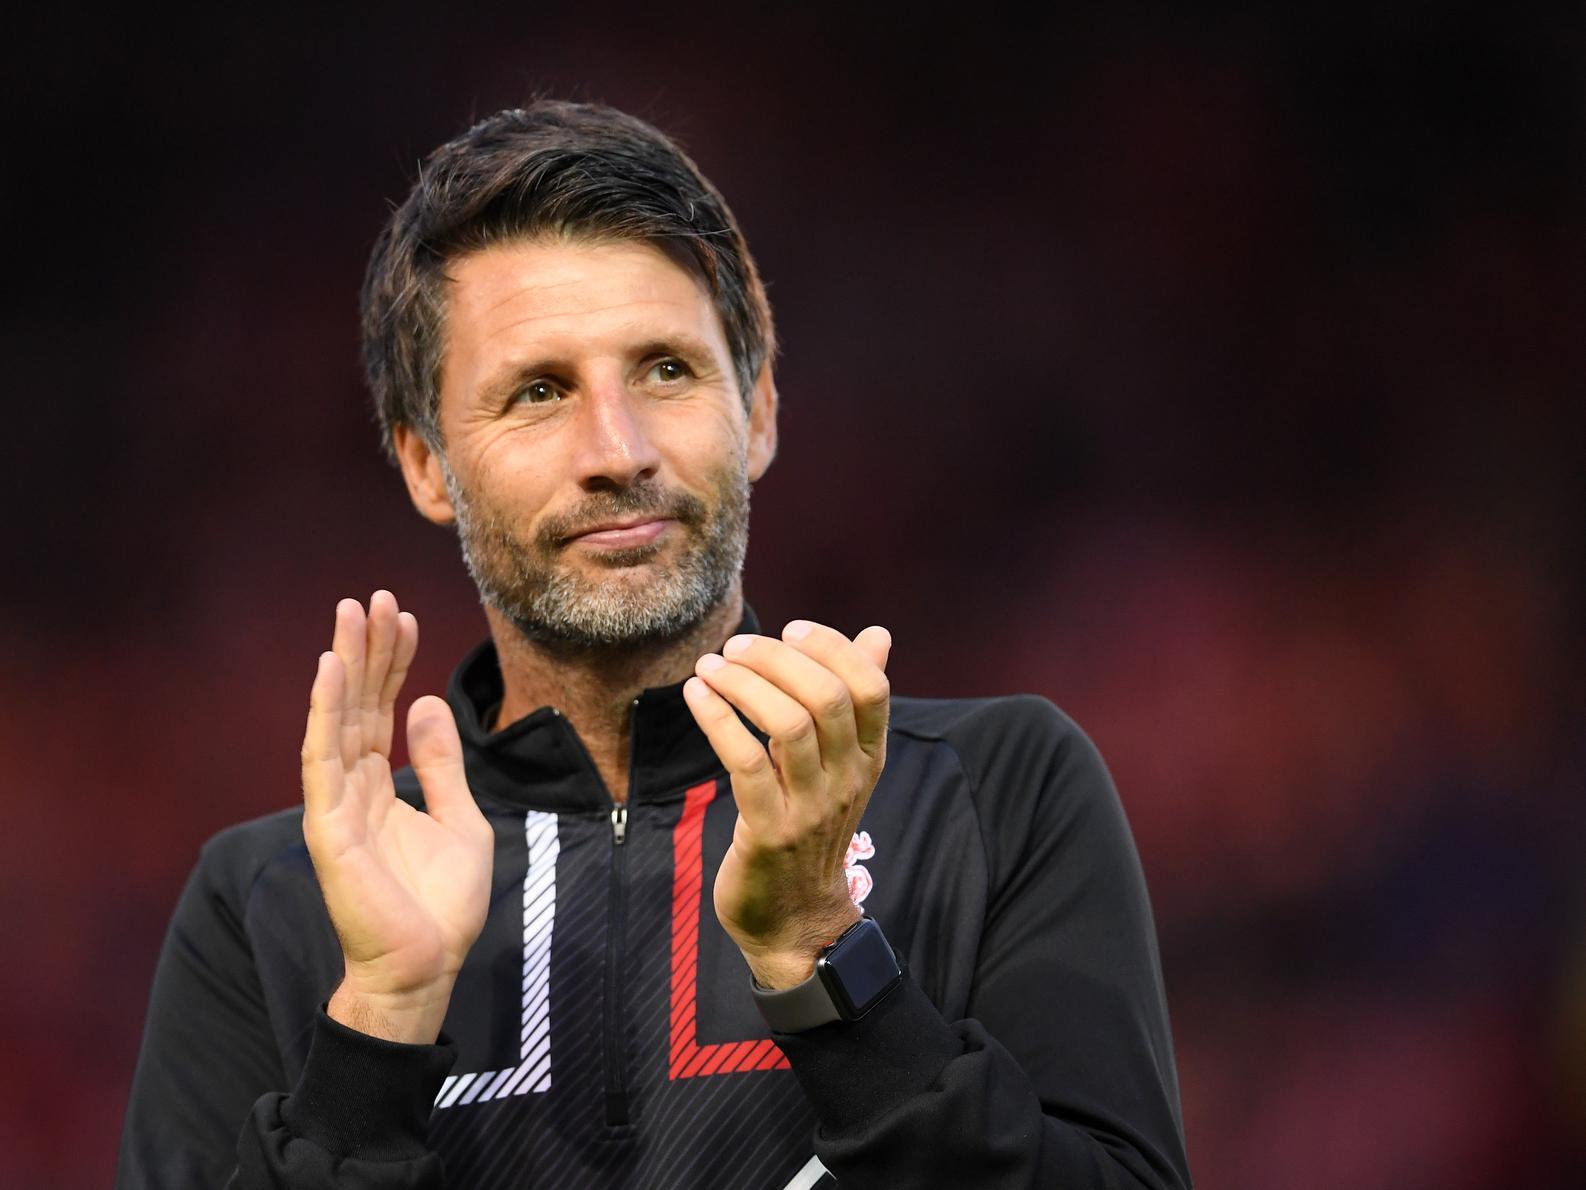 Huddersfield Town boss Danny Cowley has admitted he is open to the possibility of making some of his loan players sign permanently in the summer. (Examiner Live)